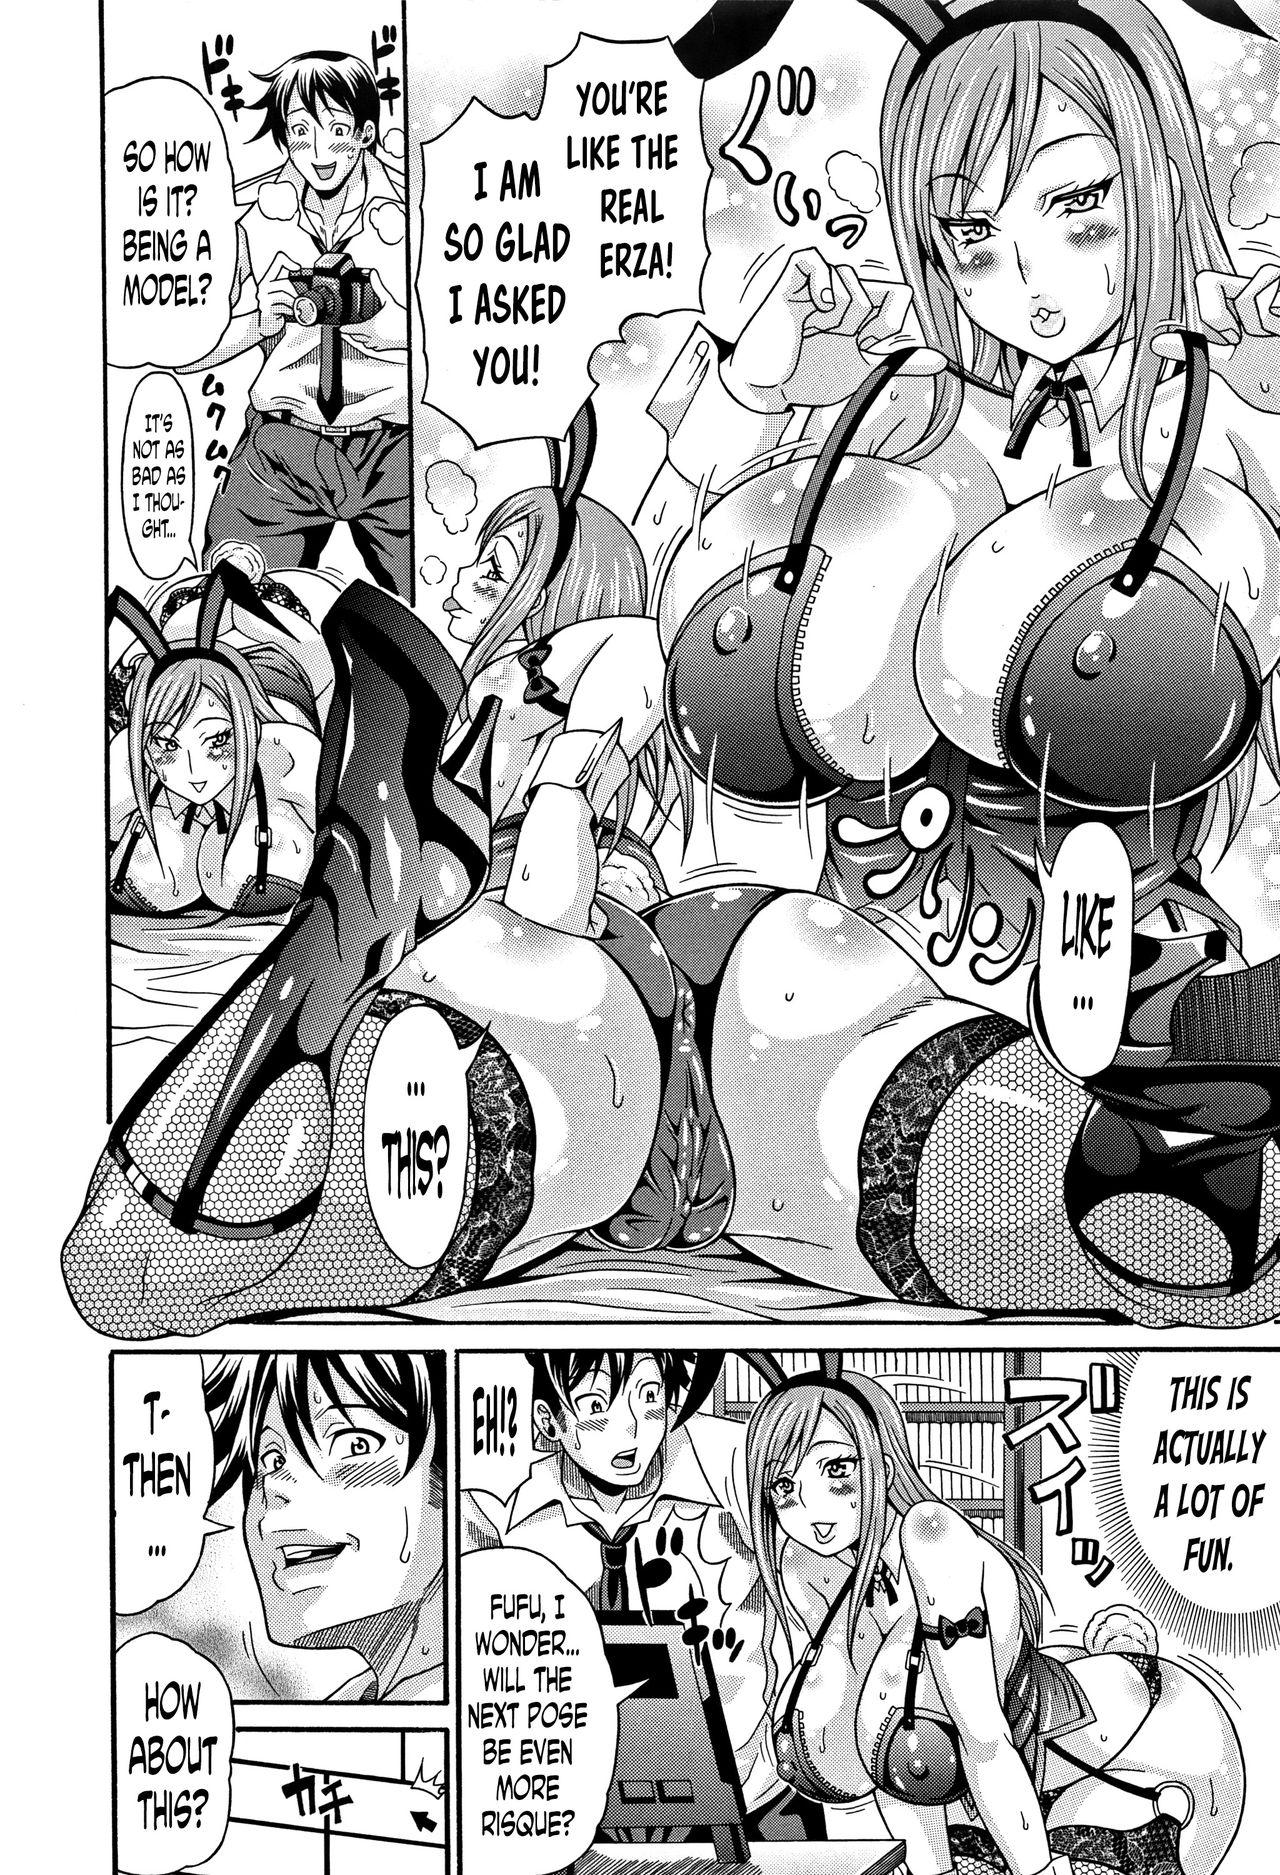 [Andou Hiroyuki] Mamire Chichi - Sticky Tits Feel Hot All Over. Ch.1-3 [English] [doujin-moe.us] 25